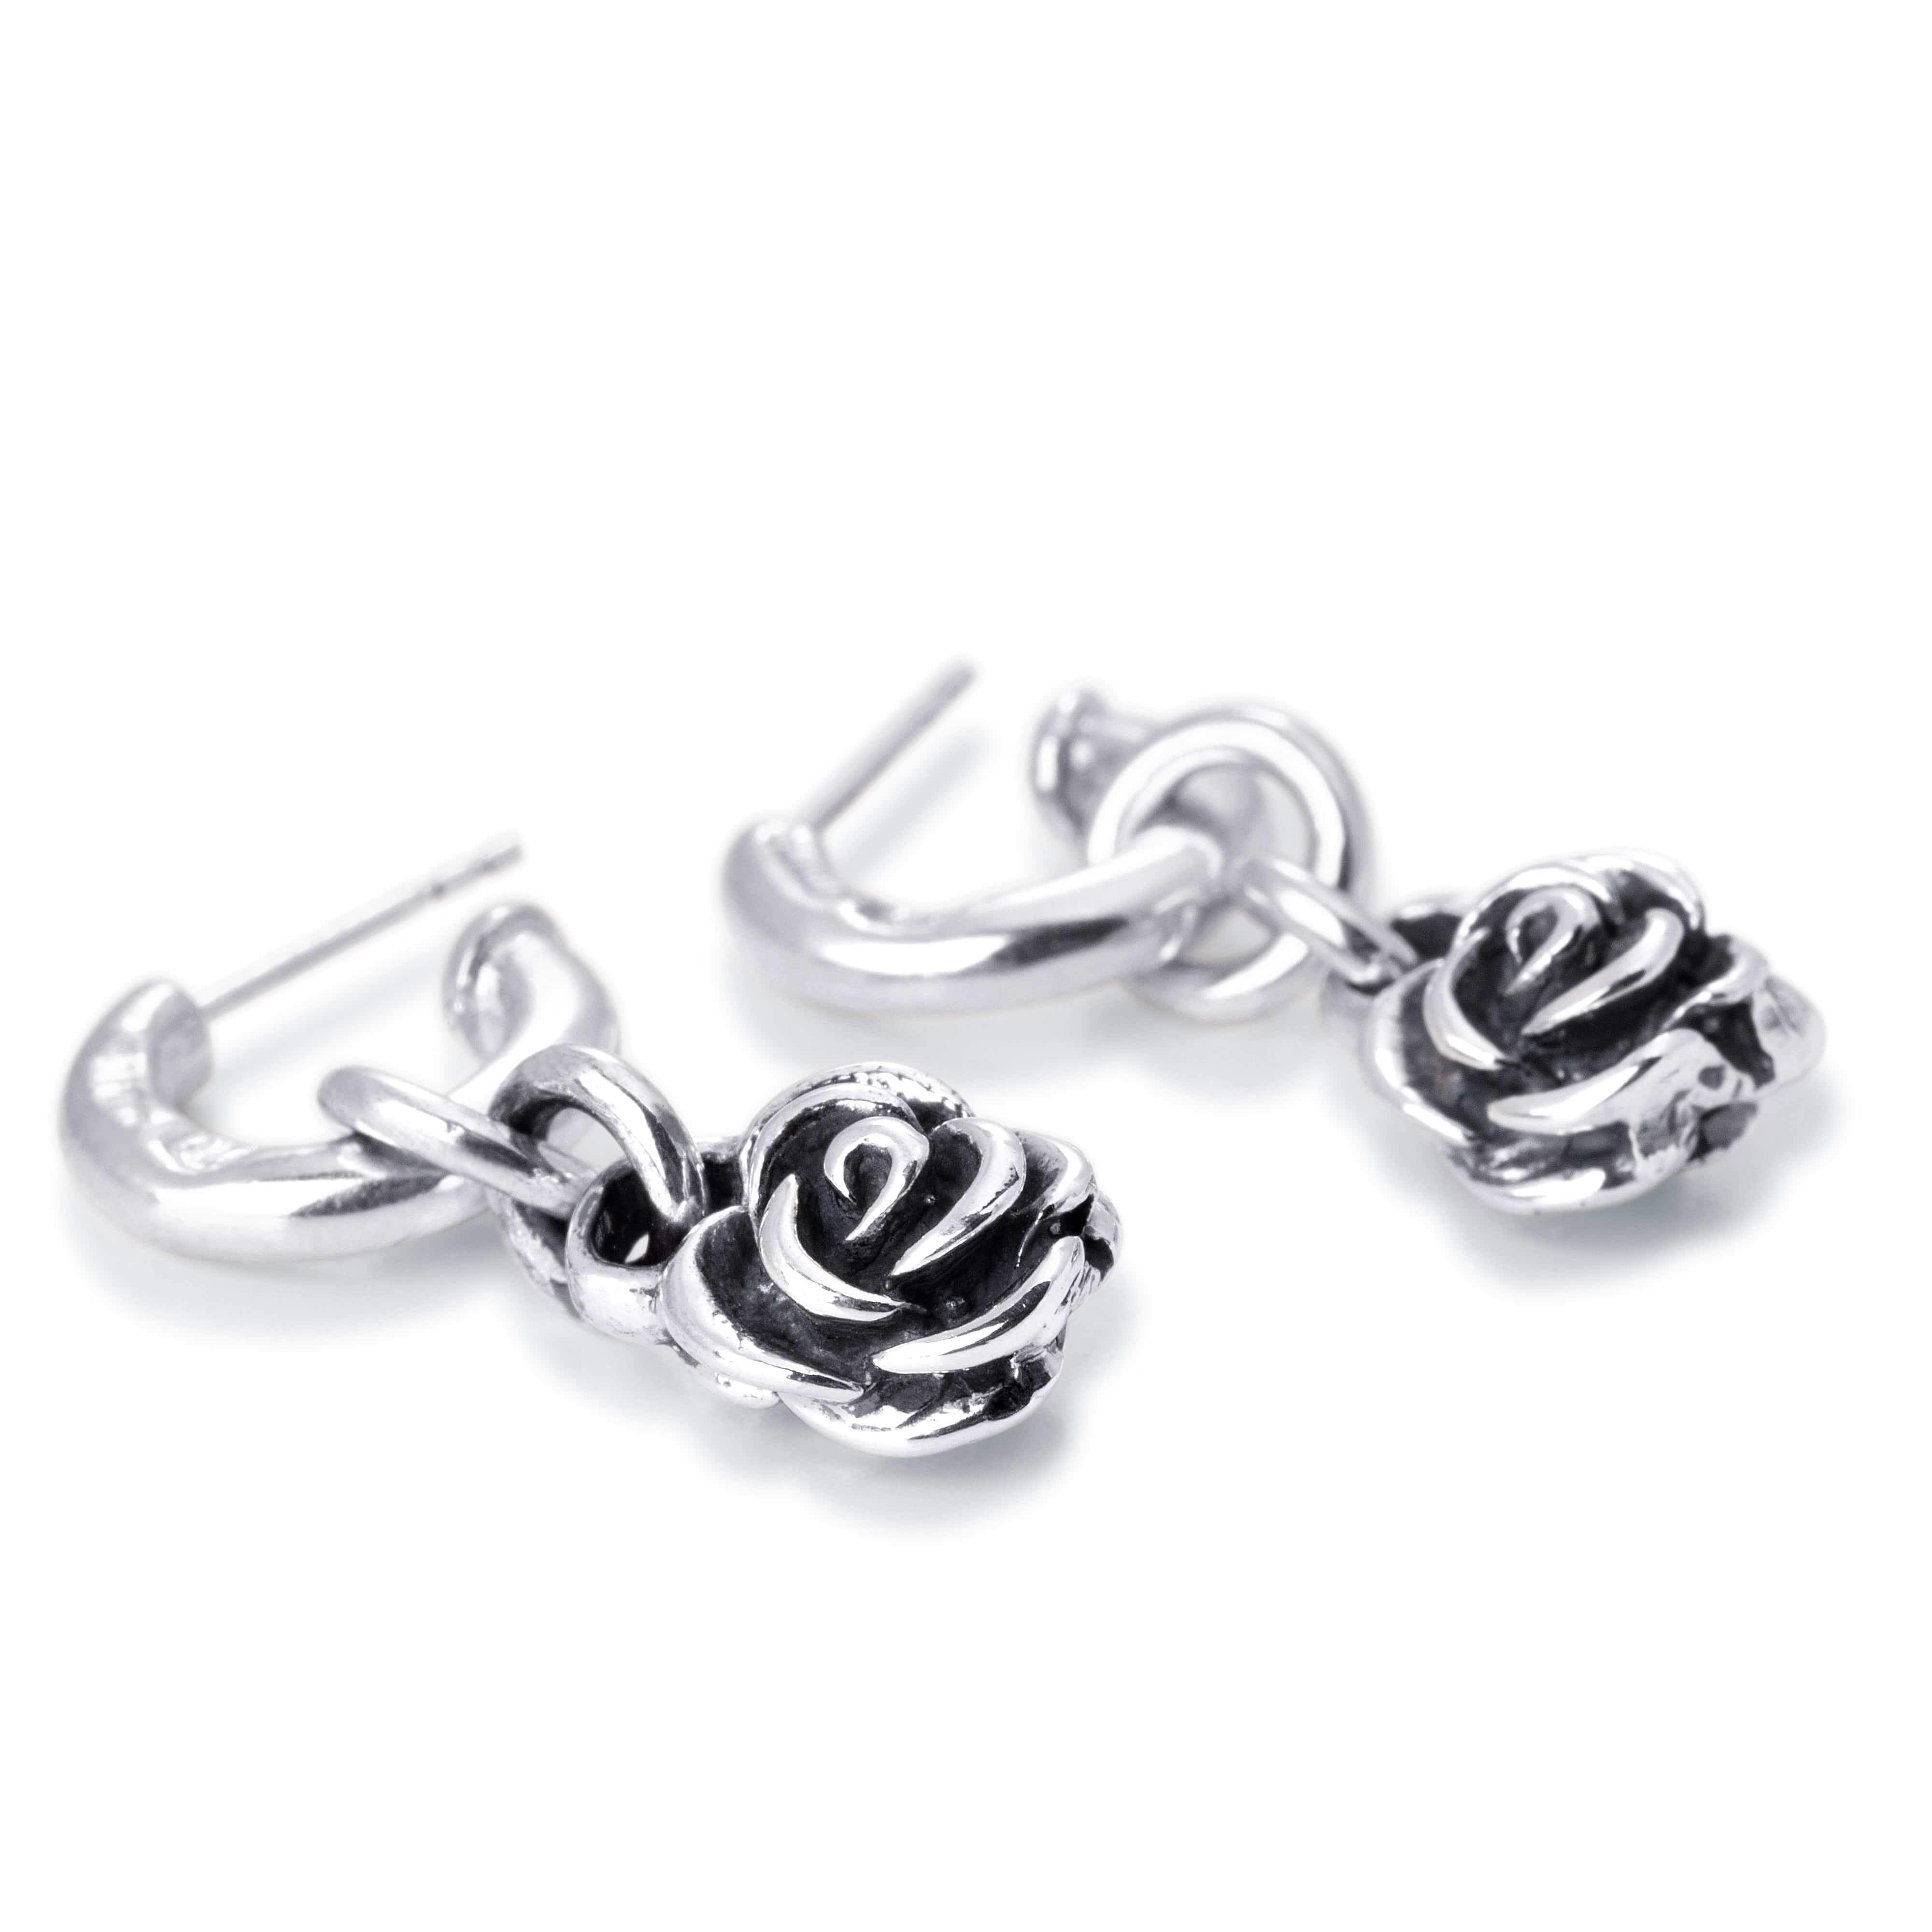 Plain solid sterling silver hoop stud with hanging rose charm.